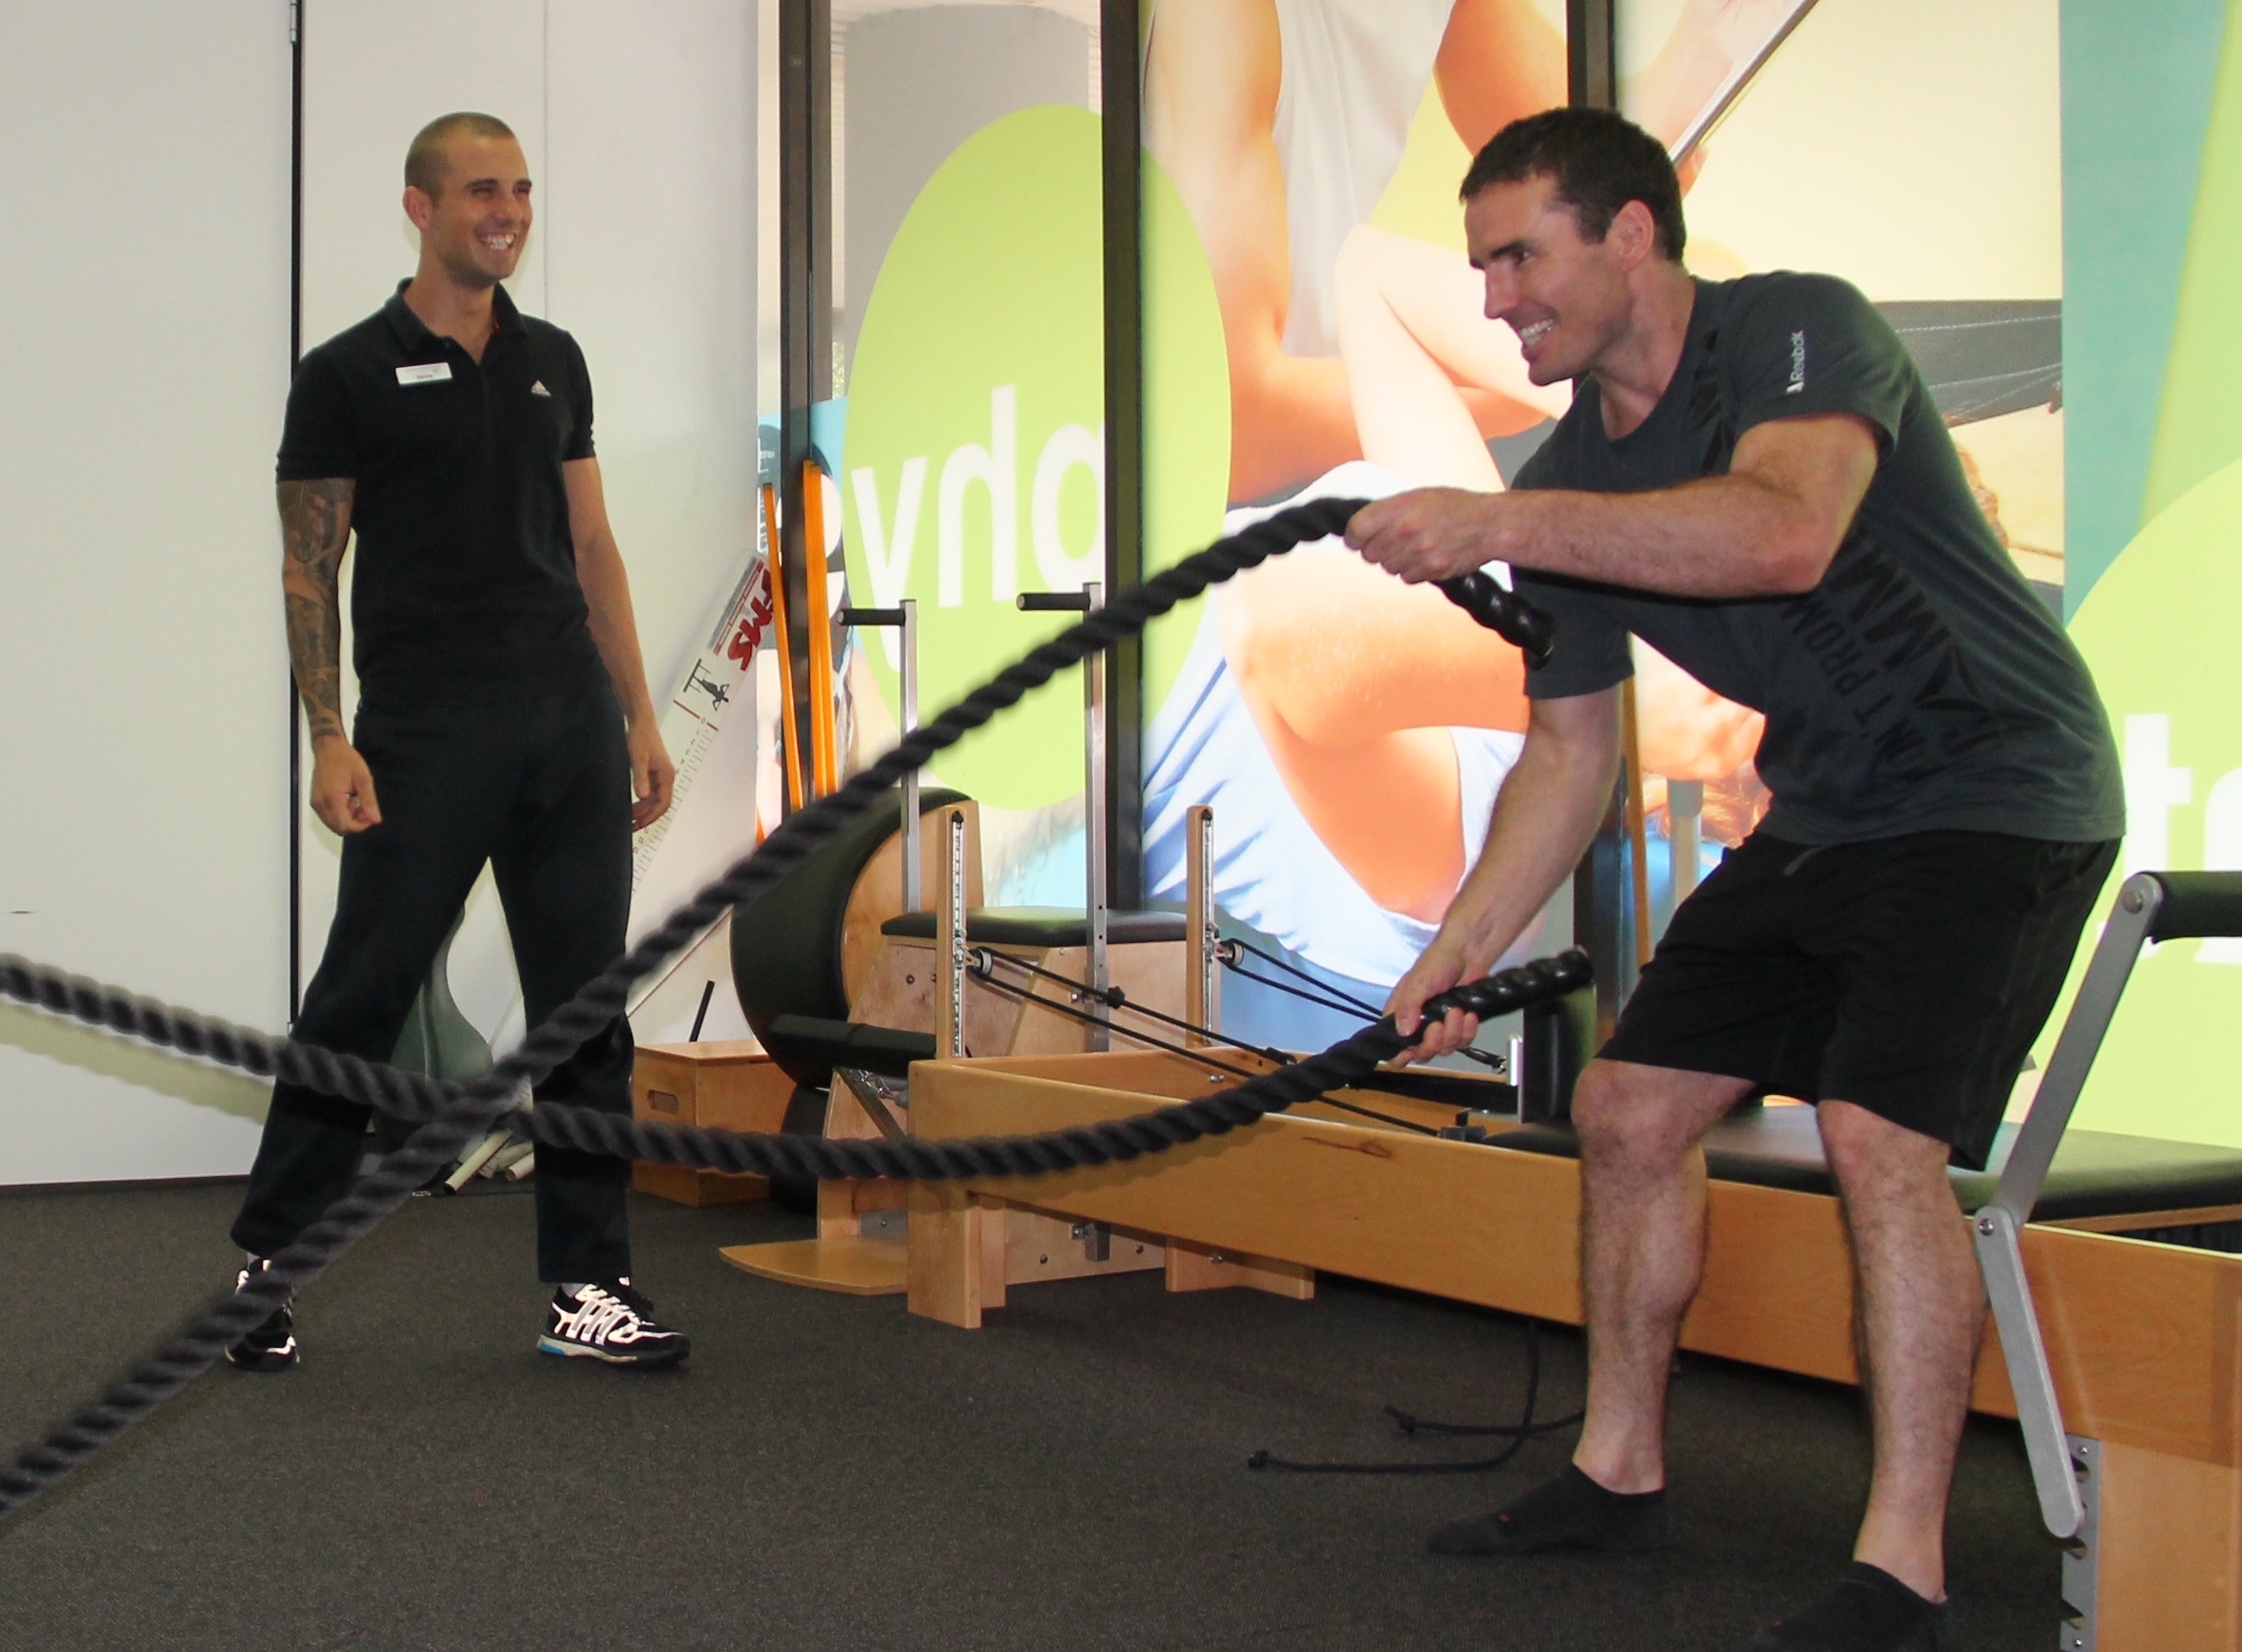 FMS & Personal training at Central Performance.